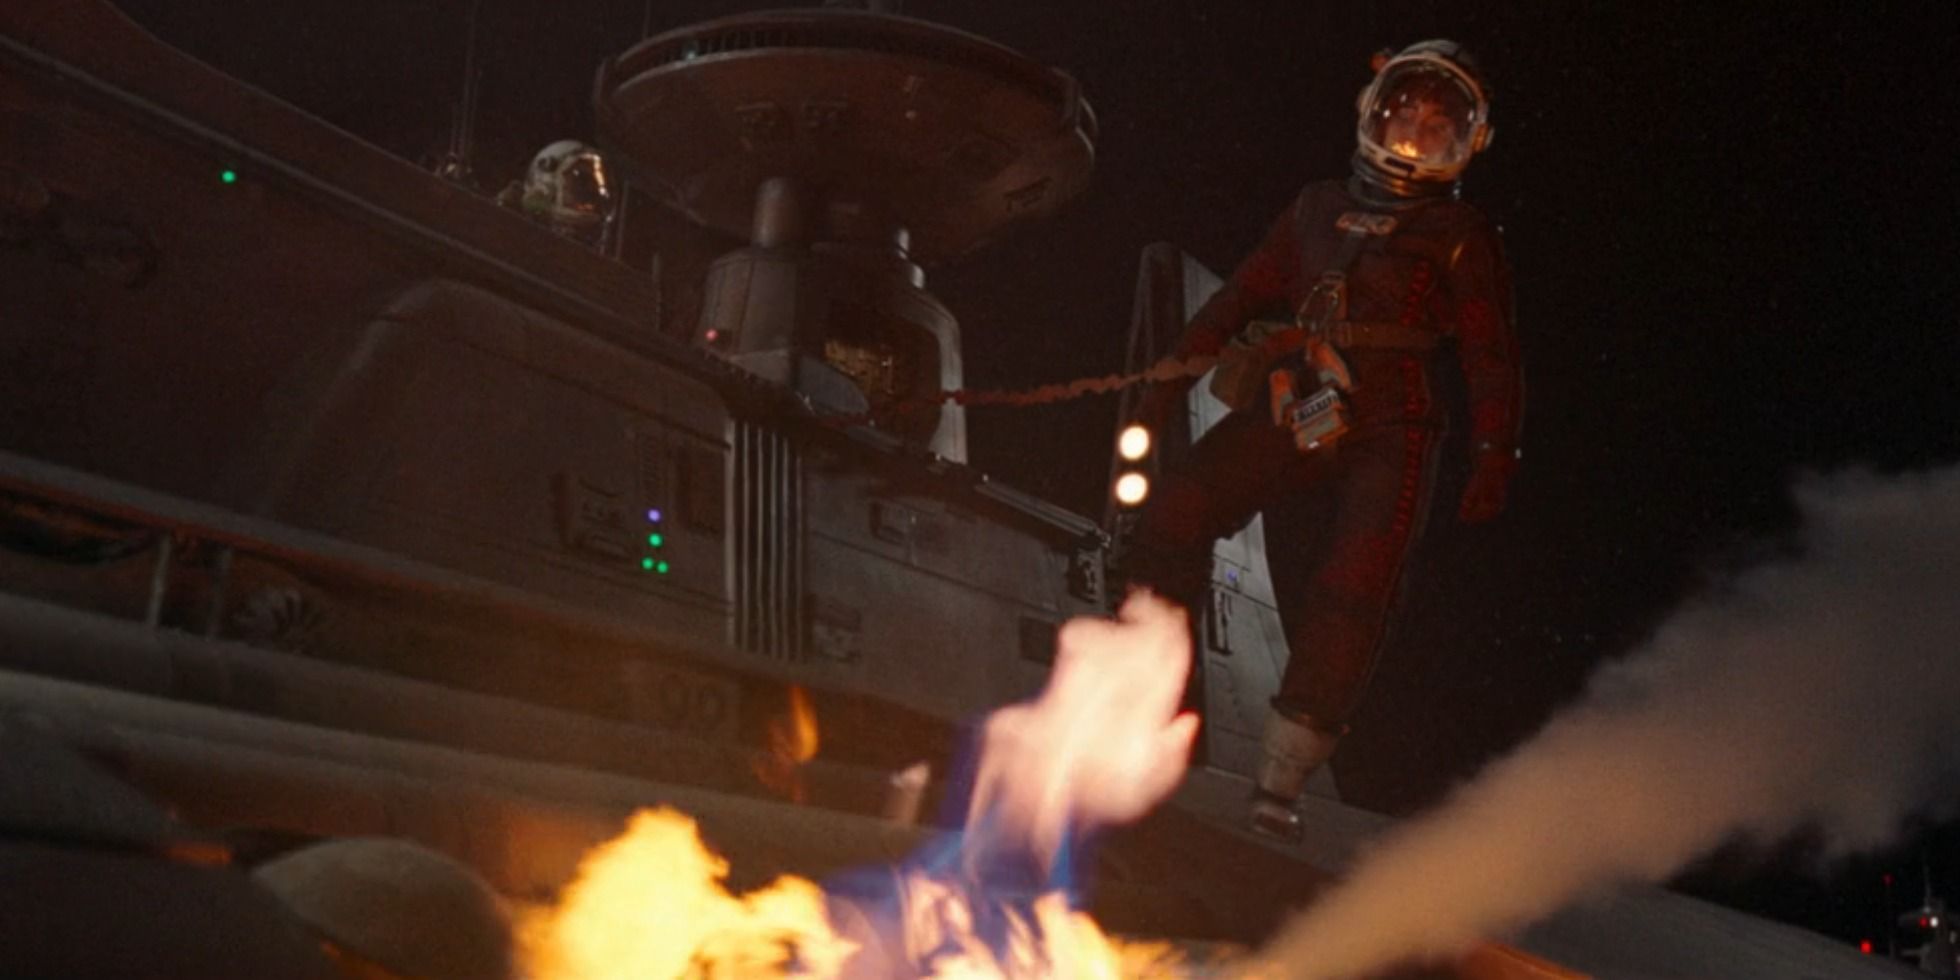 Osha in a space suit looking at a fire in space/on a ship in the first episode of The Acolyte